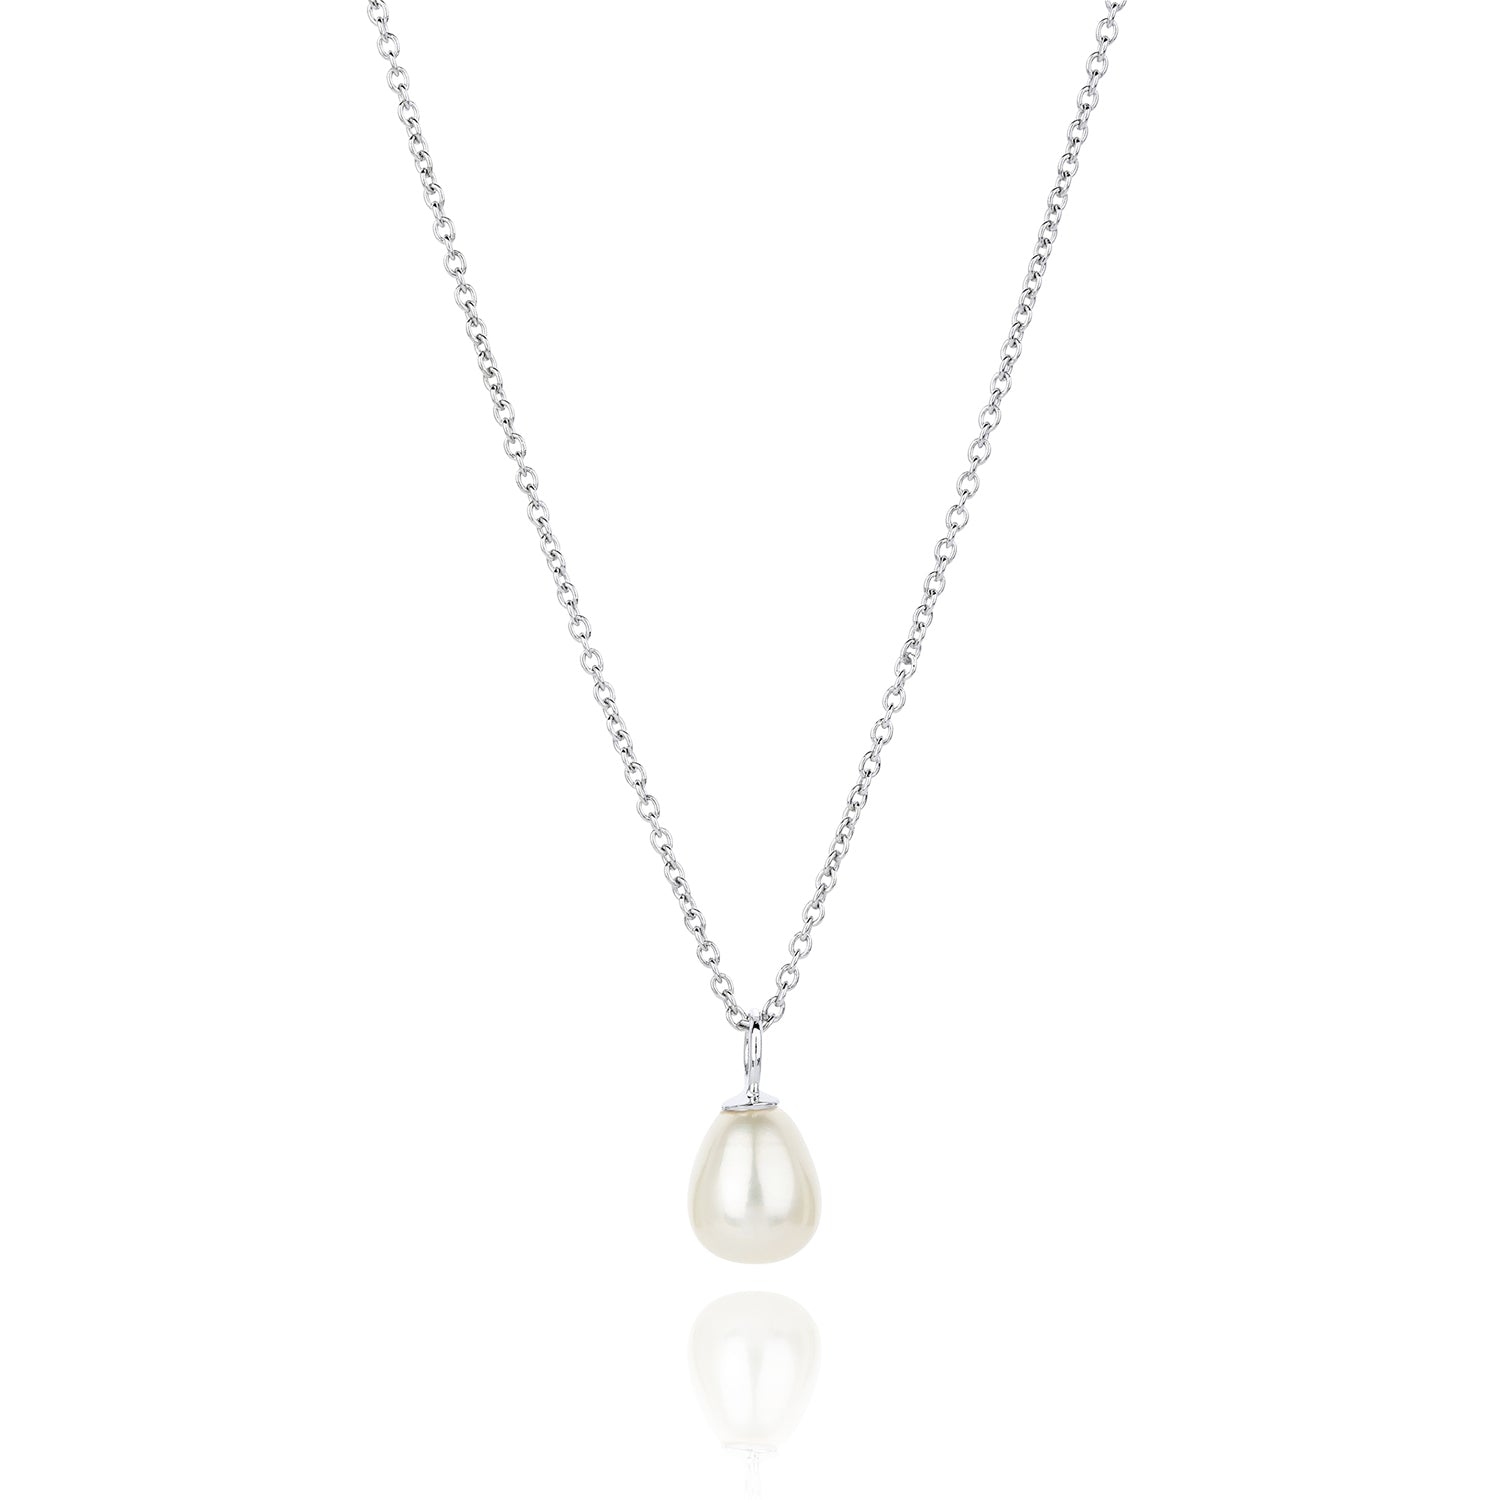 Simple silver chain with single fresh water pearl drop